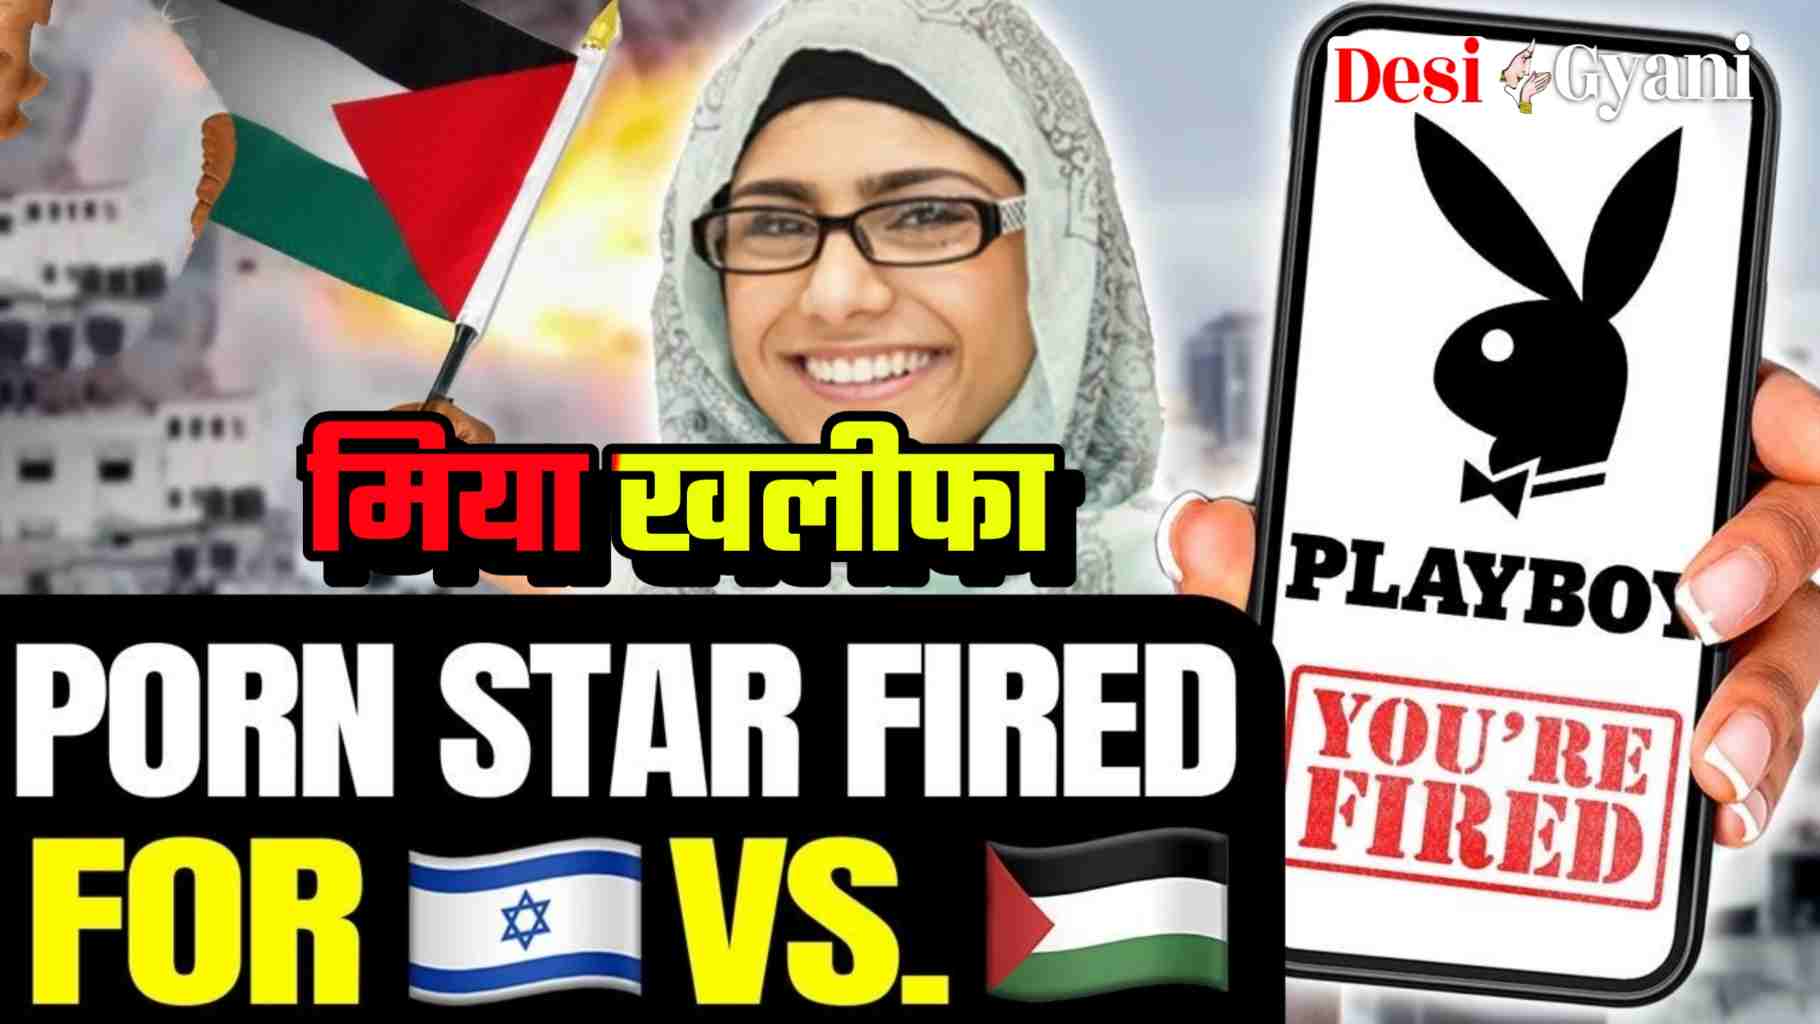 Mia khalifa fired by Playboy supporting hamas